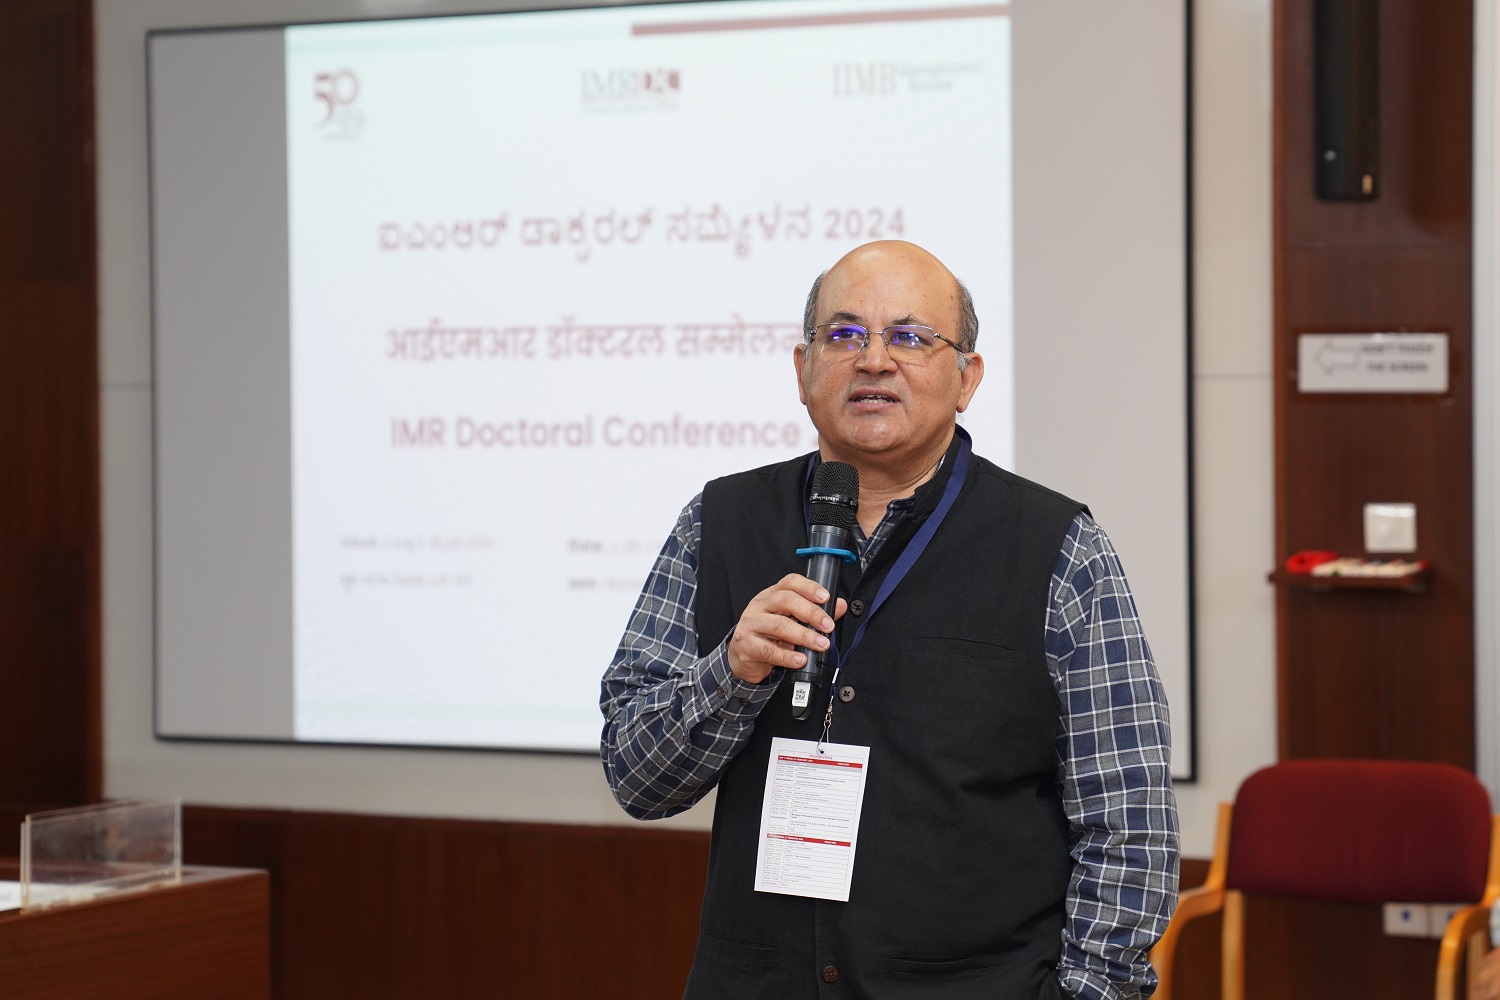 Professor Rishikesha T Krishnan, Director, IIMB, welcomes delegates and participants to the IMR Doctoral Conference